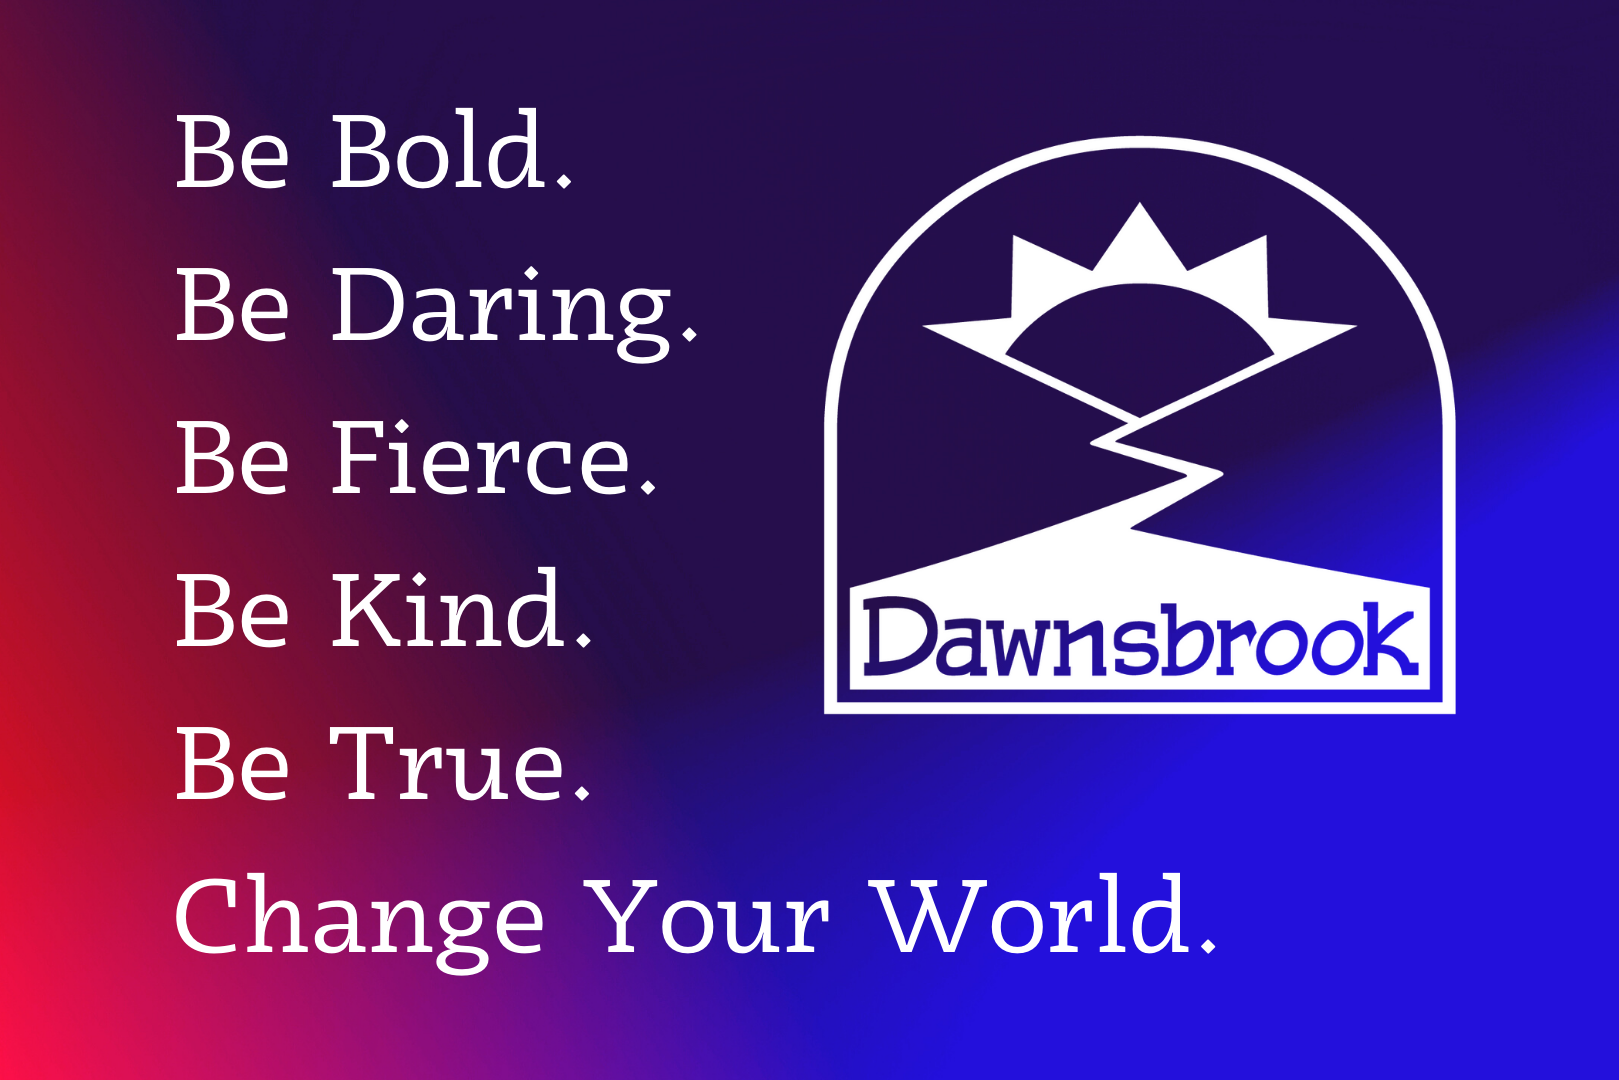 Be bold. Be daring. Be fierce. Be kind. Be true. Change your world.